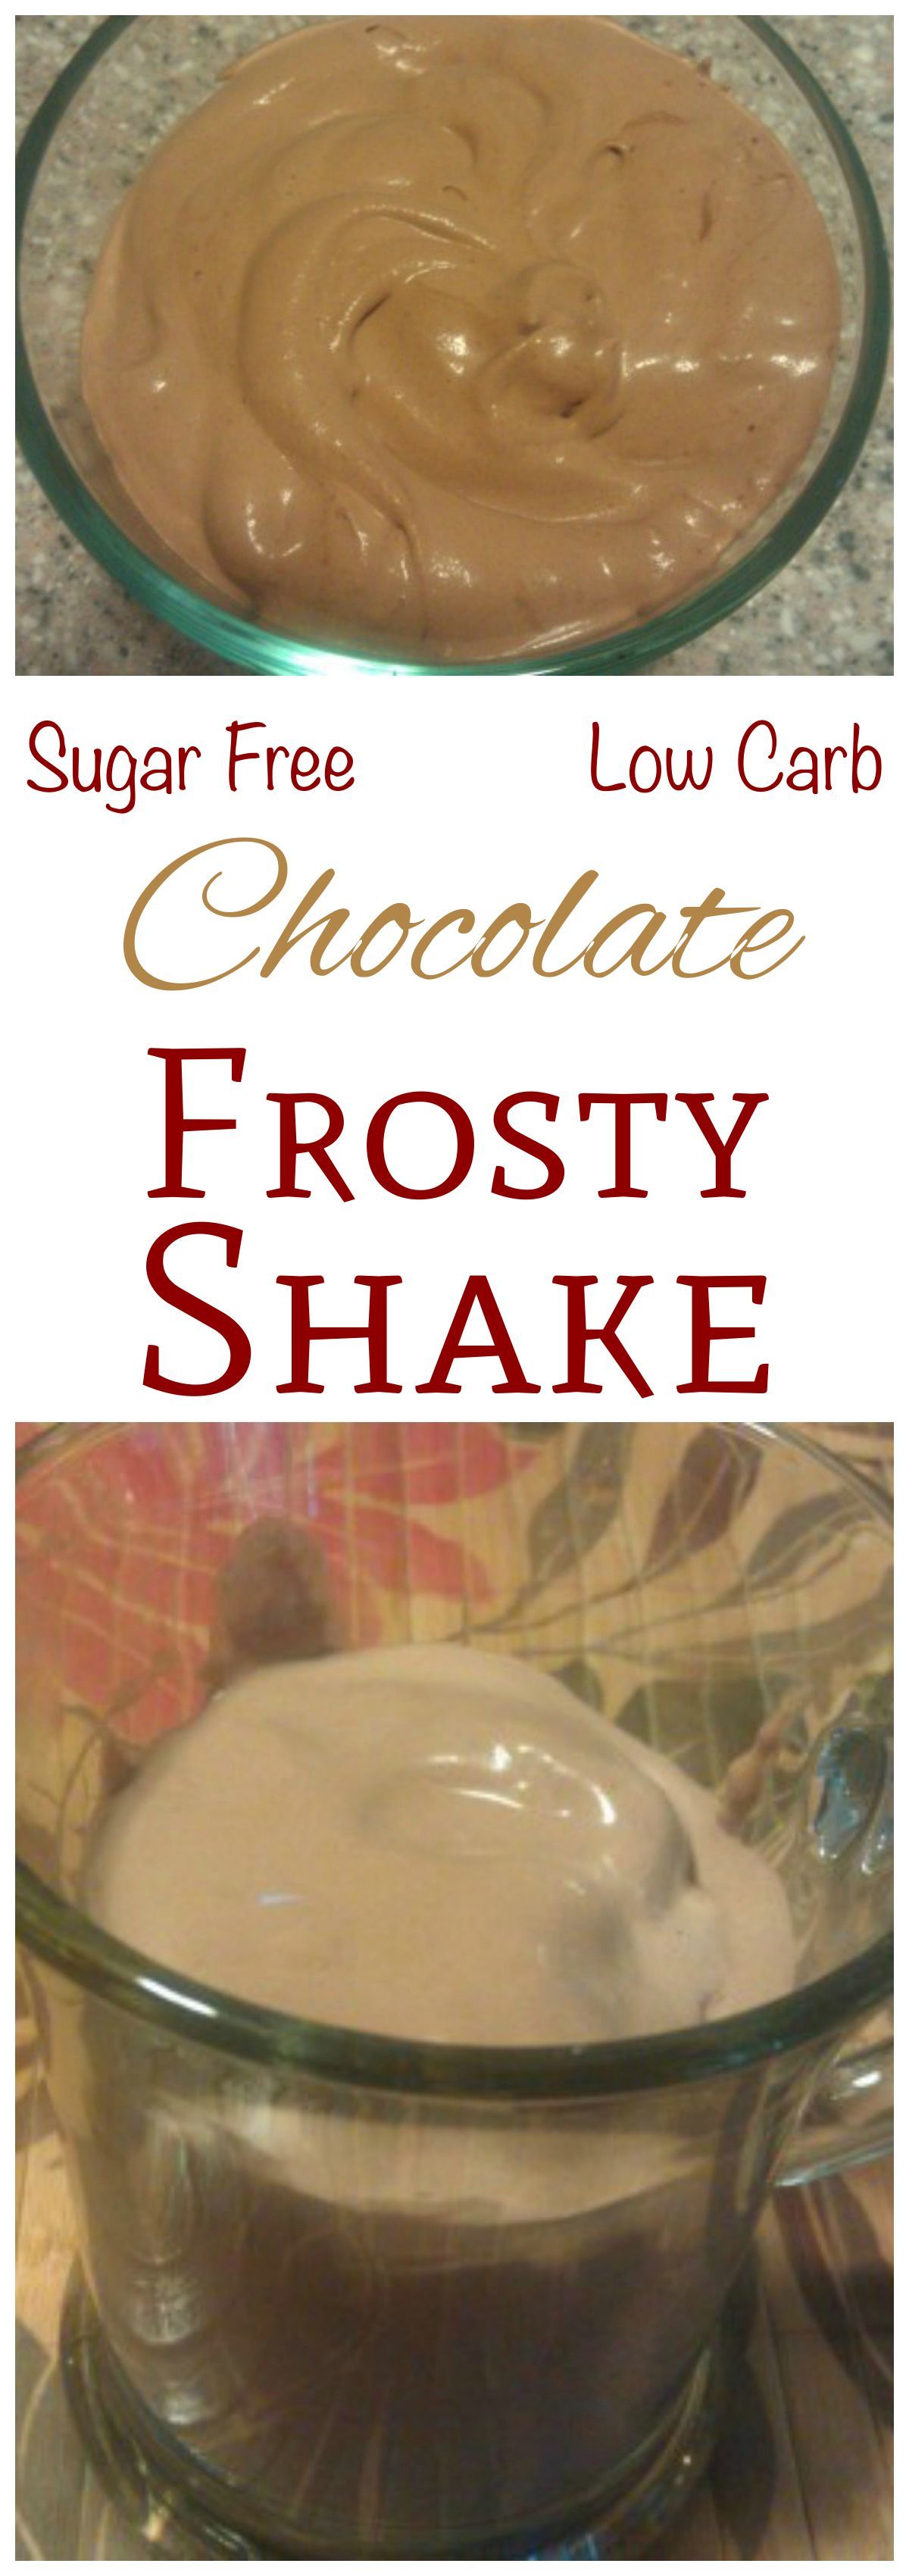 This is a really quick and easy way to make a frozen thick chocolate shake at home. The creamy low carb ch